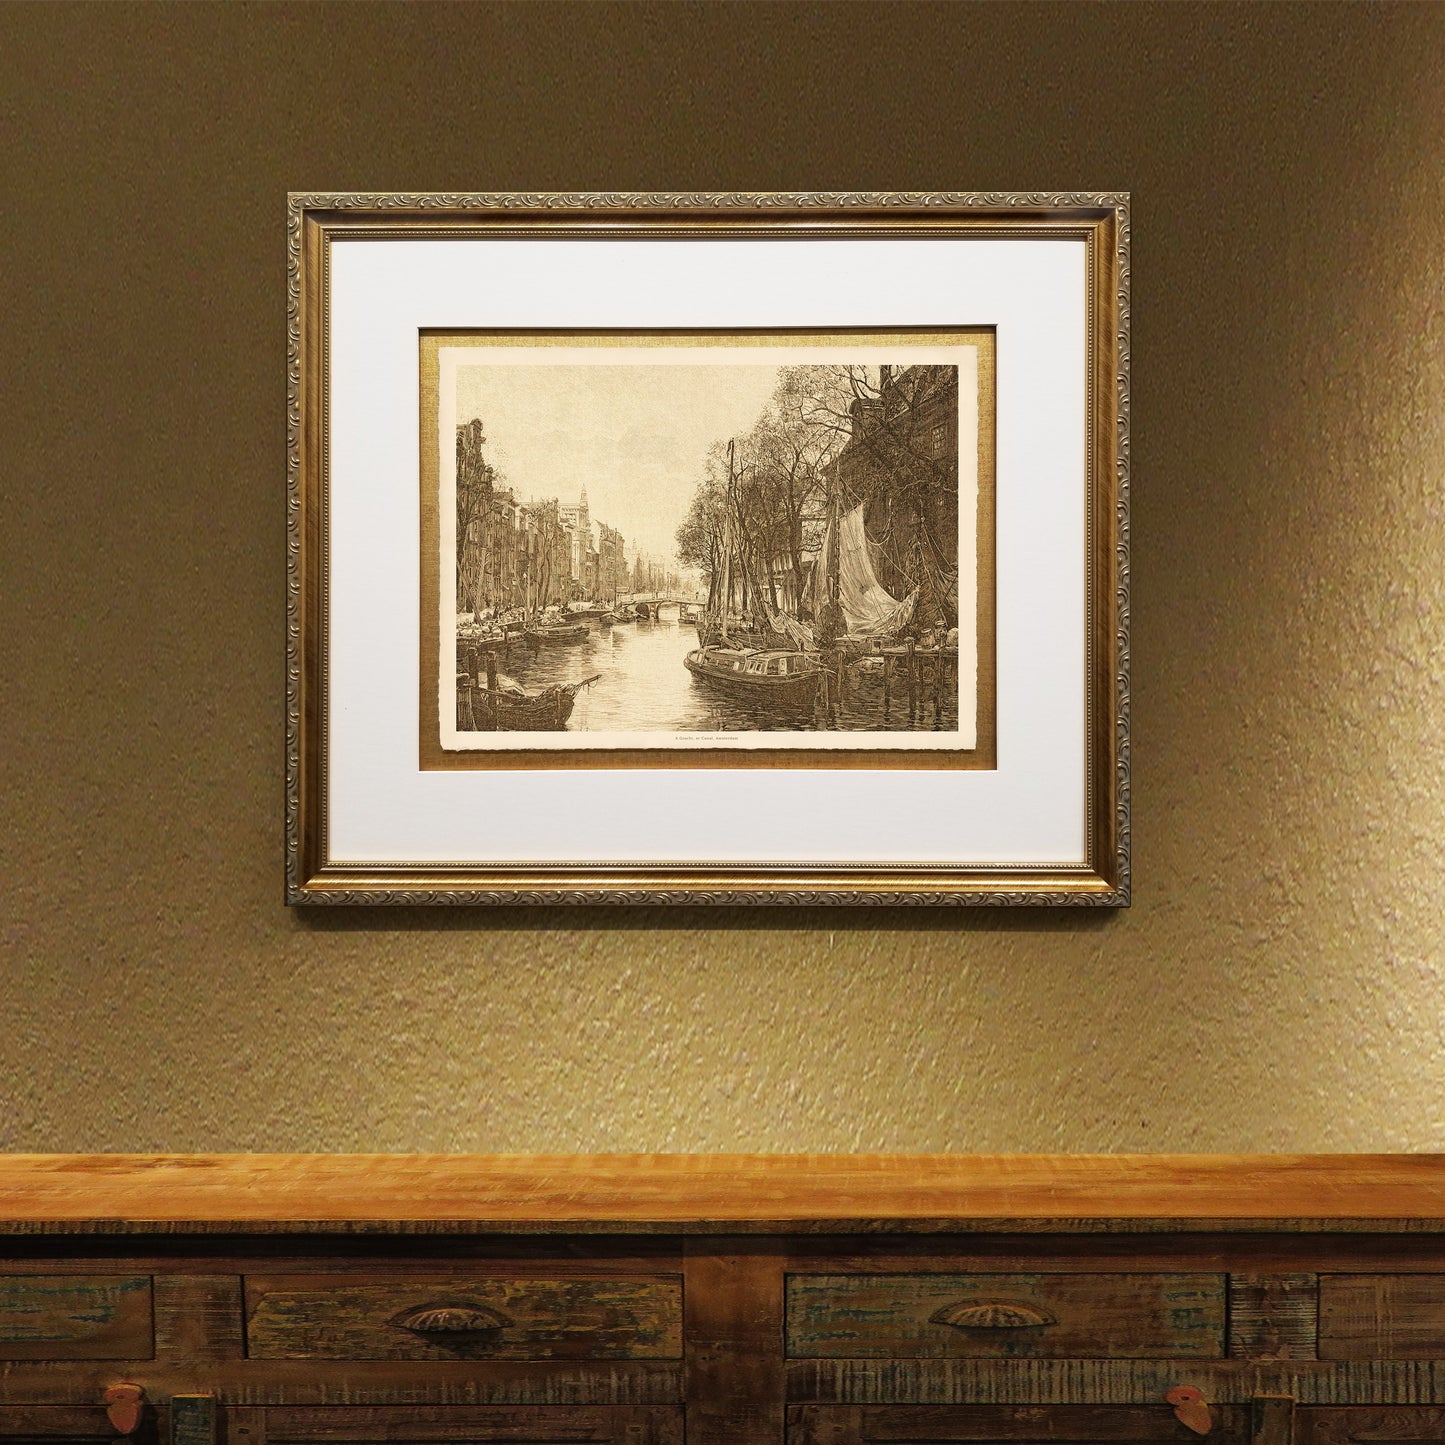 A Gracht, or Canal, Amsterdam Framed Fine Art Prints Gifts Antique Europe Wall Art